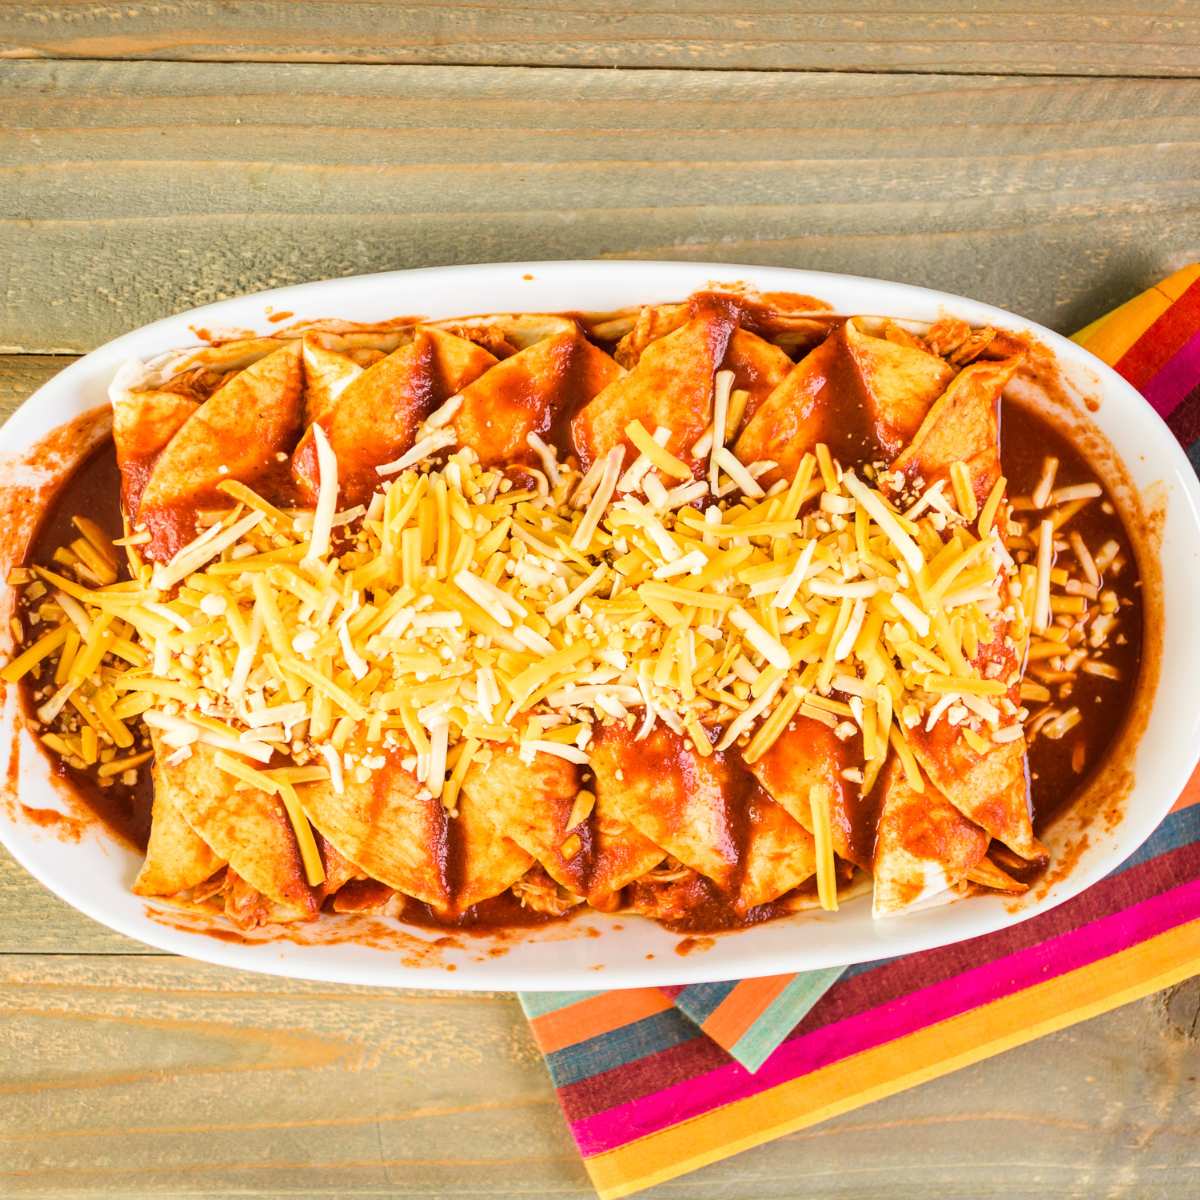 Enchiladas dipped in a sauce topped with cheese in a tray